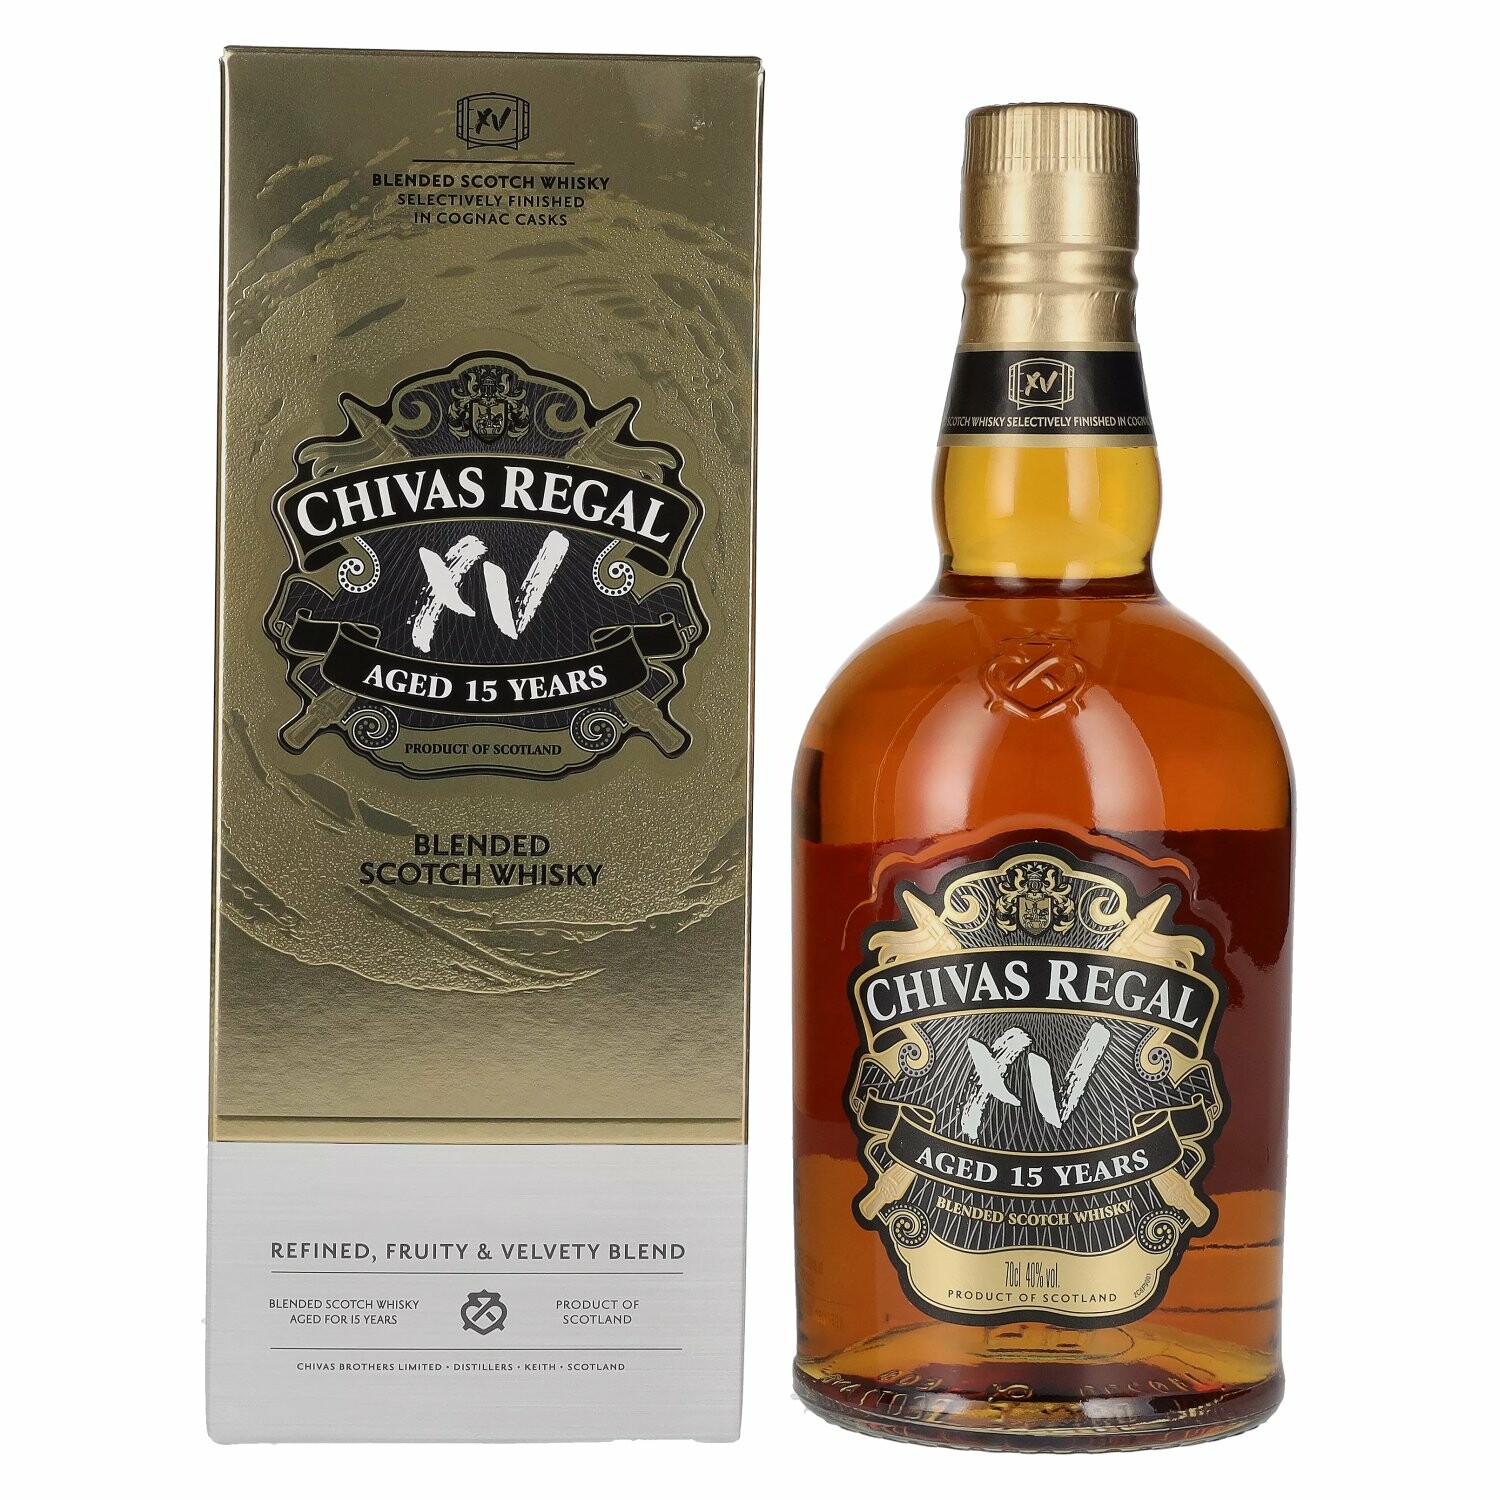 Chivas Regal XV 15 Years Old Blended Scotch Whisky 40% Vol. 0,7l in Giftbox